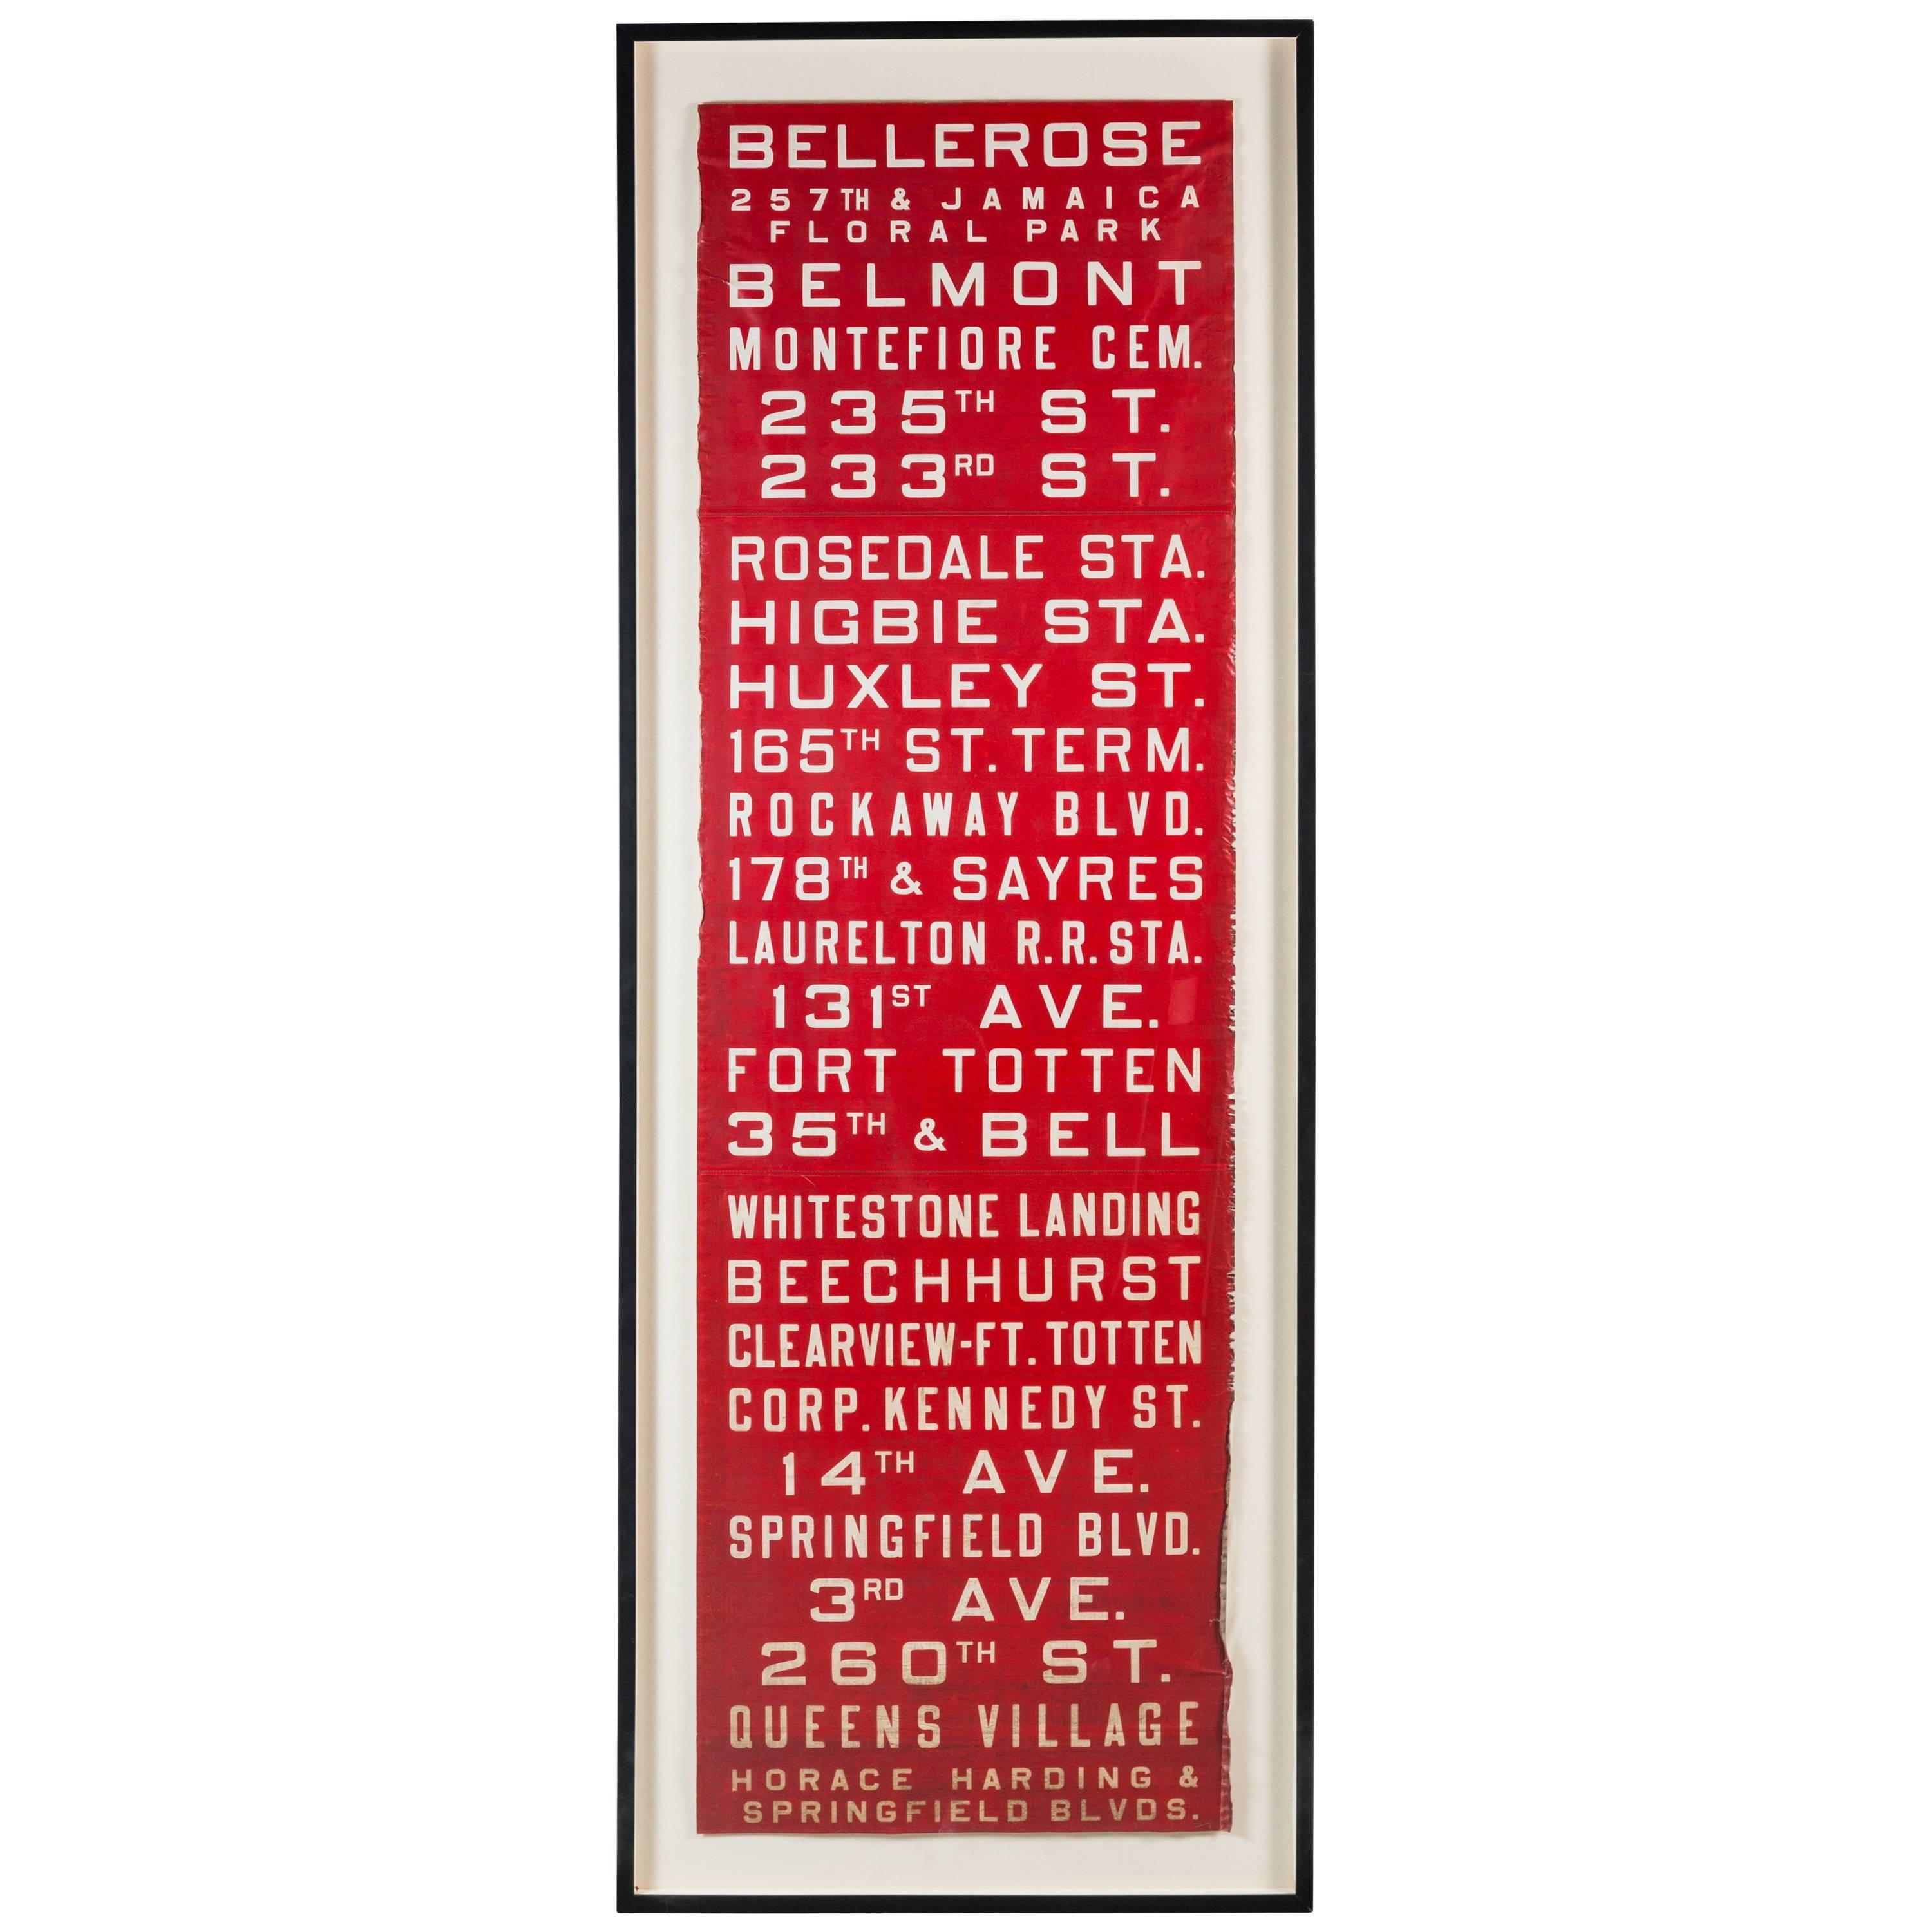 Red and White Graphic New York Bus Subway Destination Sign